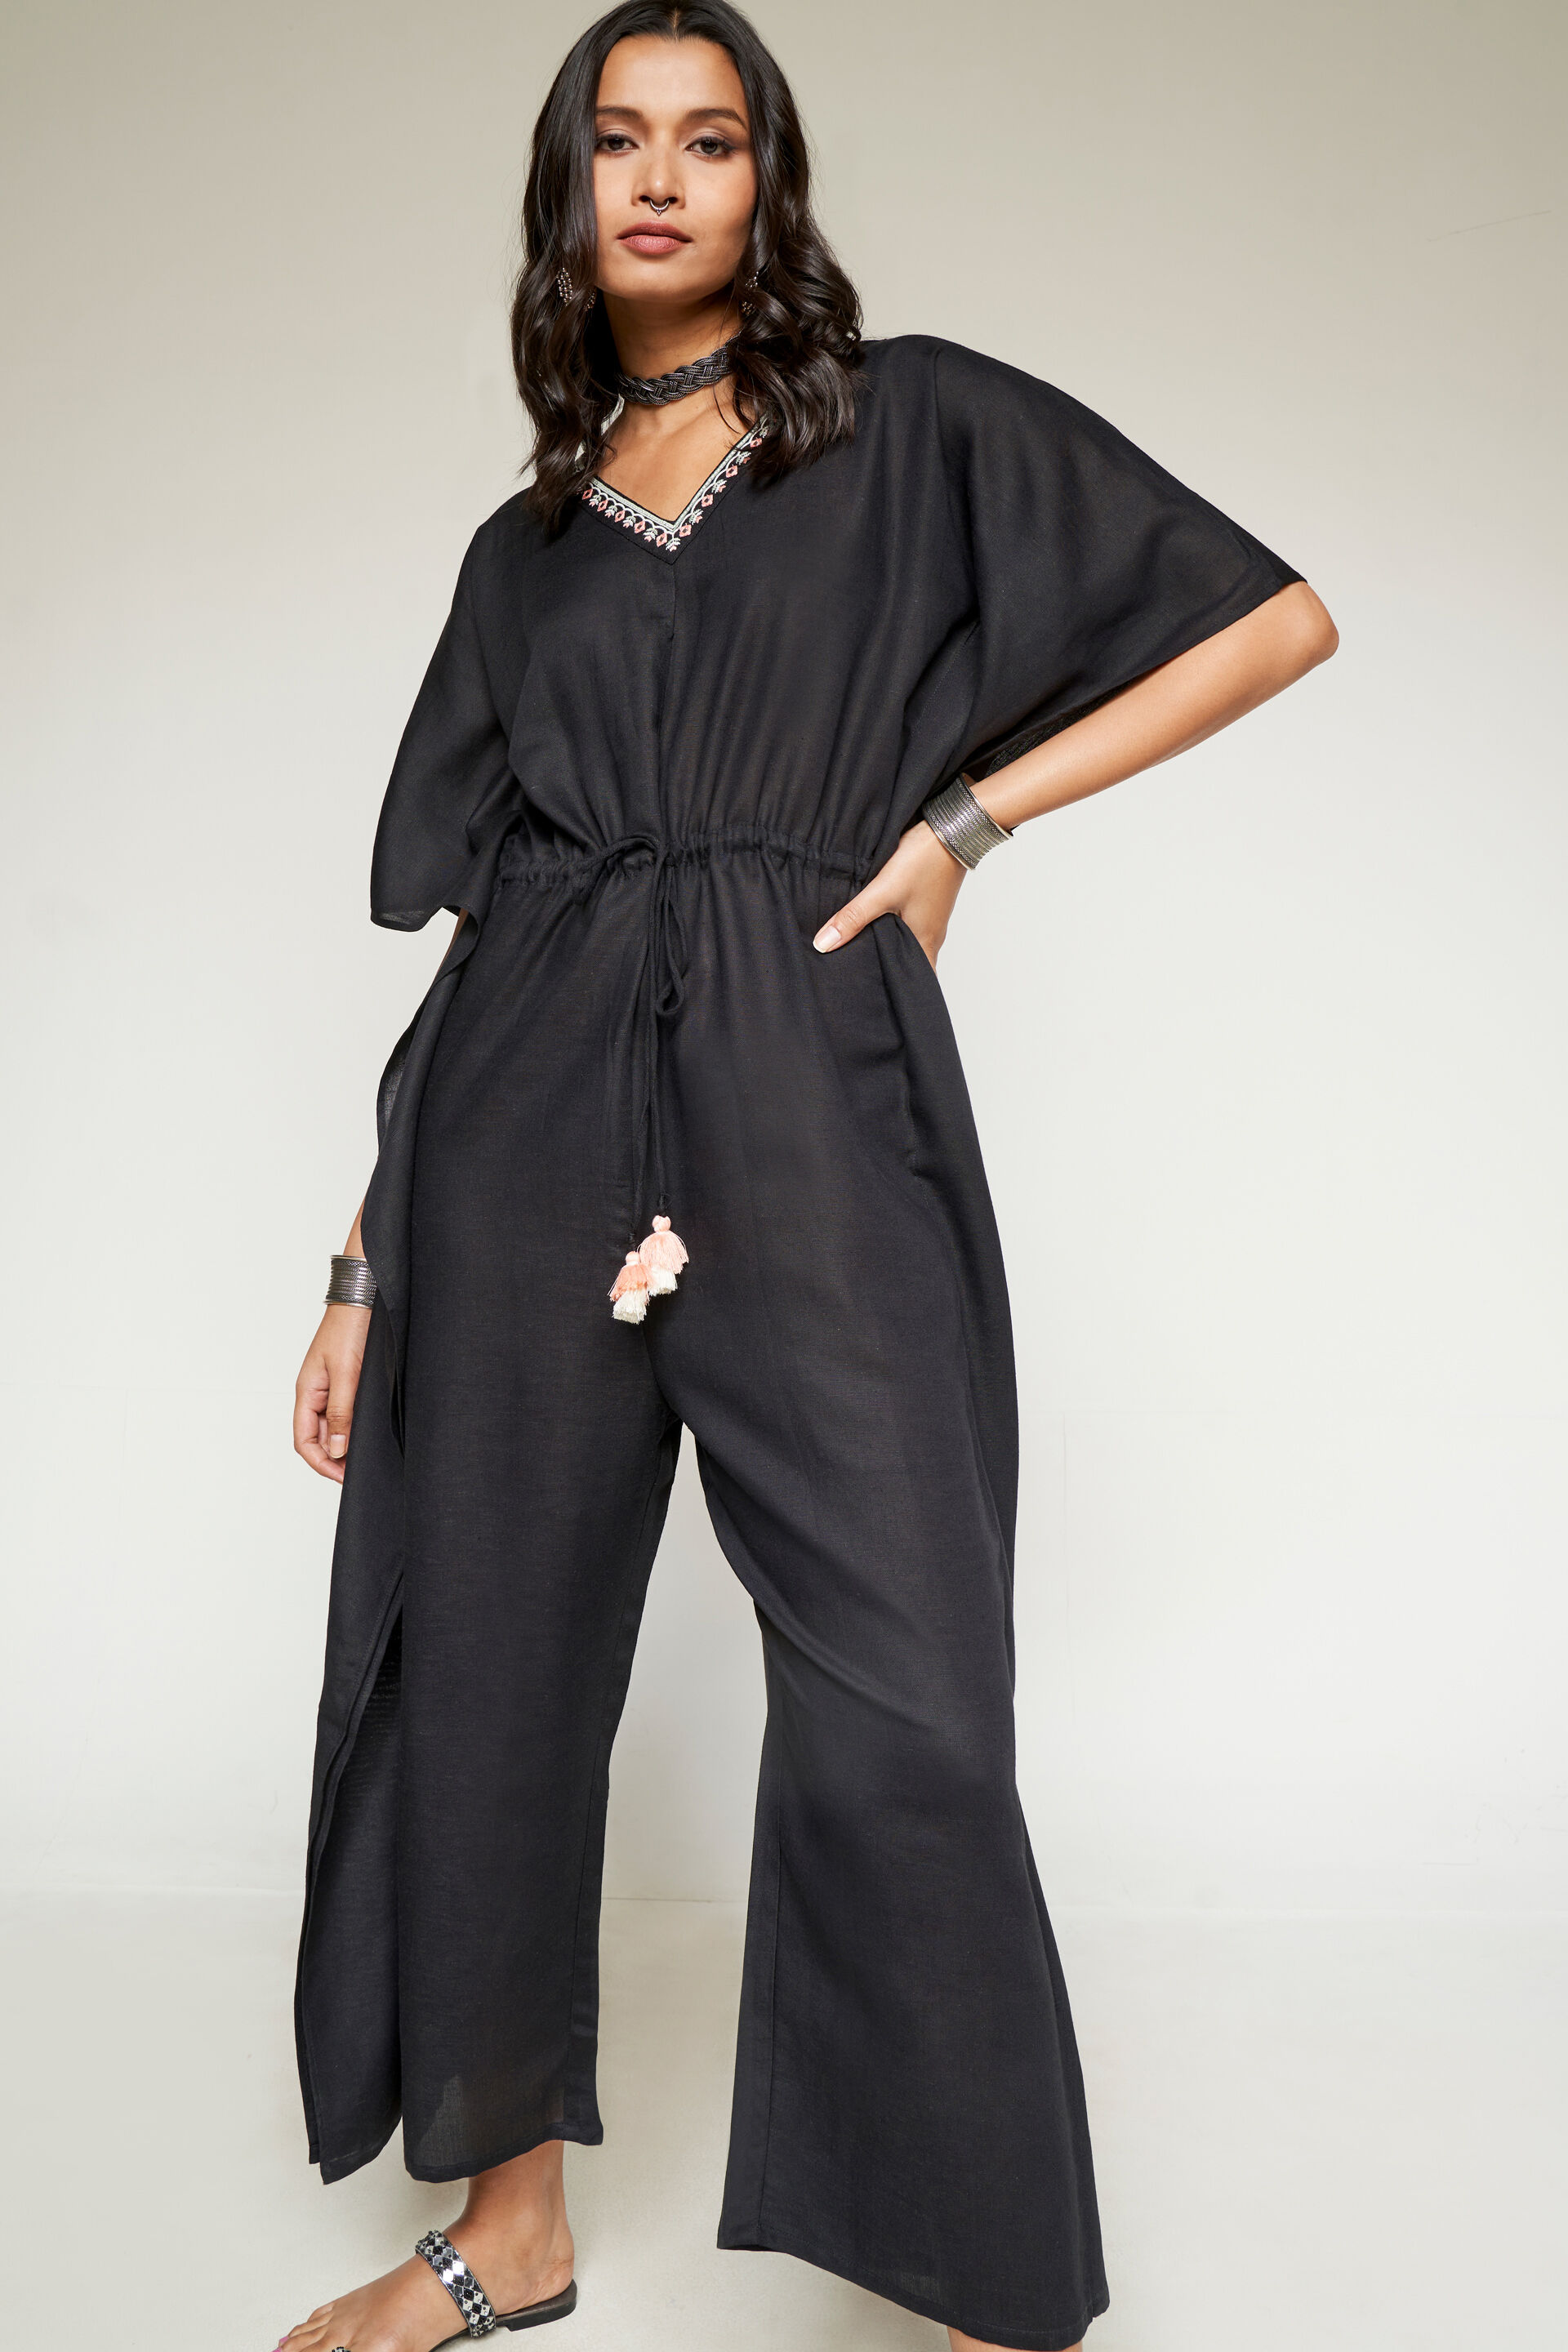 5 Reasons to Love Jumpsuits | Connected Apparel – 5 Reasons to Love  Jumpsuits